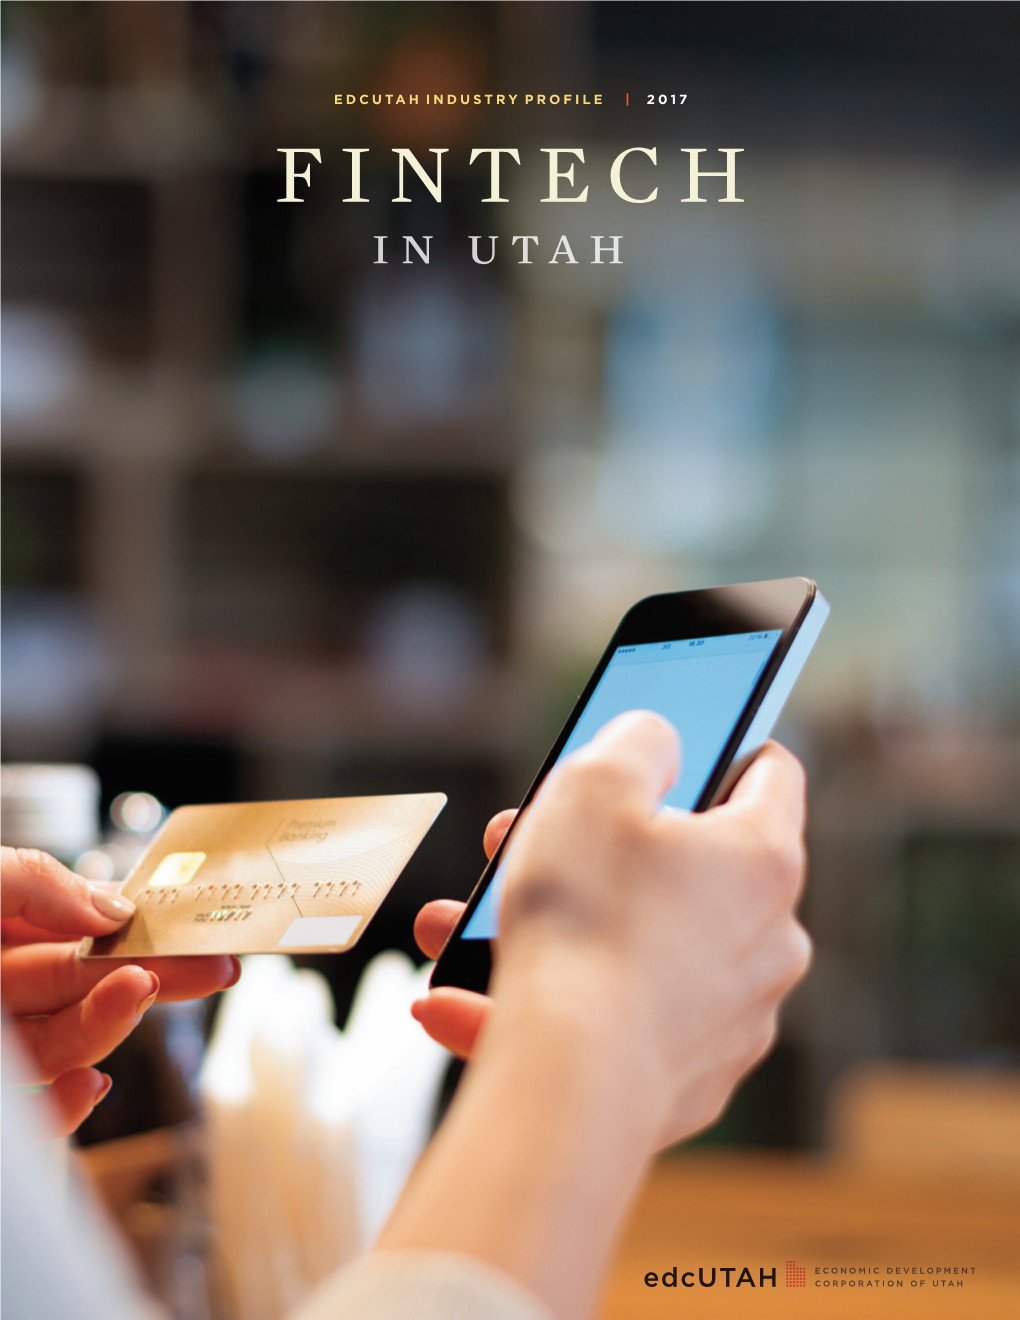 FINTECH in UTAH on the COVER Not Fully Crazy About the Cover After Searching for Several Hours, There Are Several Directions We Could Go